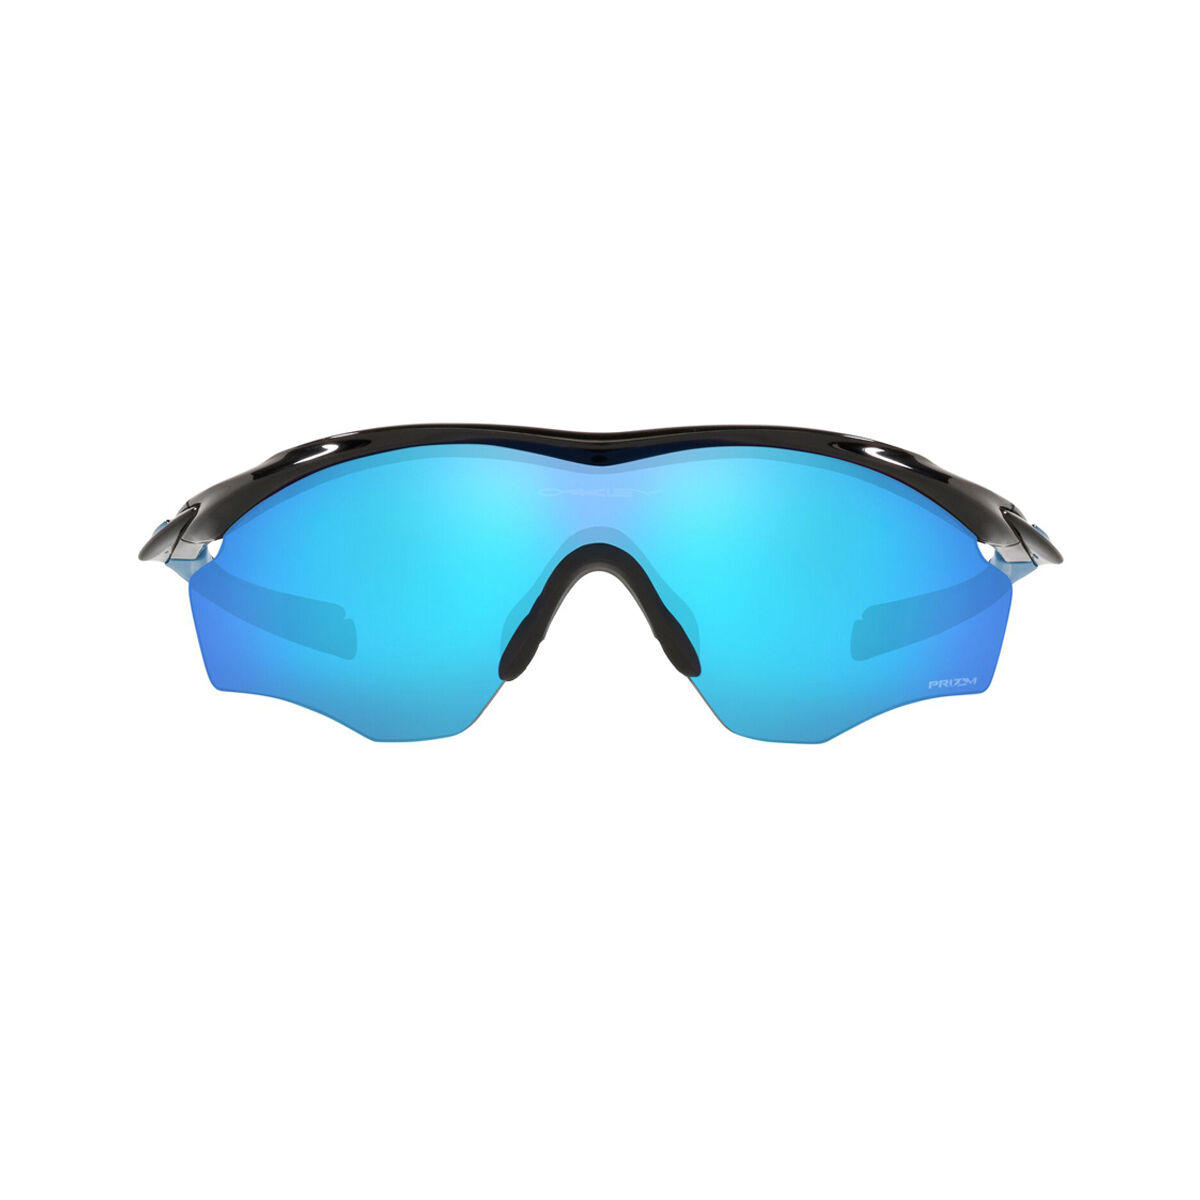 Sports Sunglasses - Running, Cycling & Outdoor - rebel